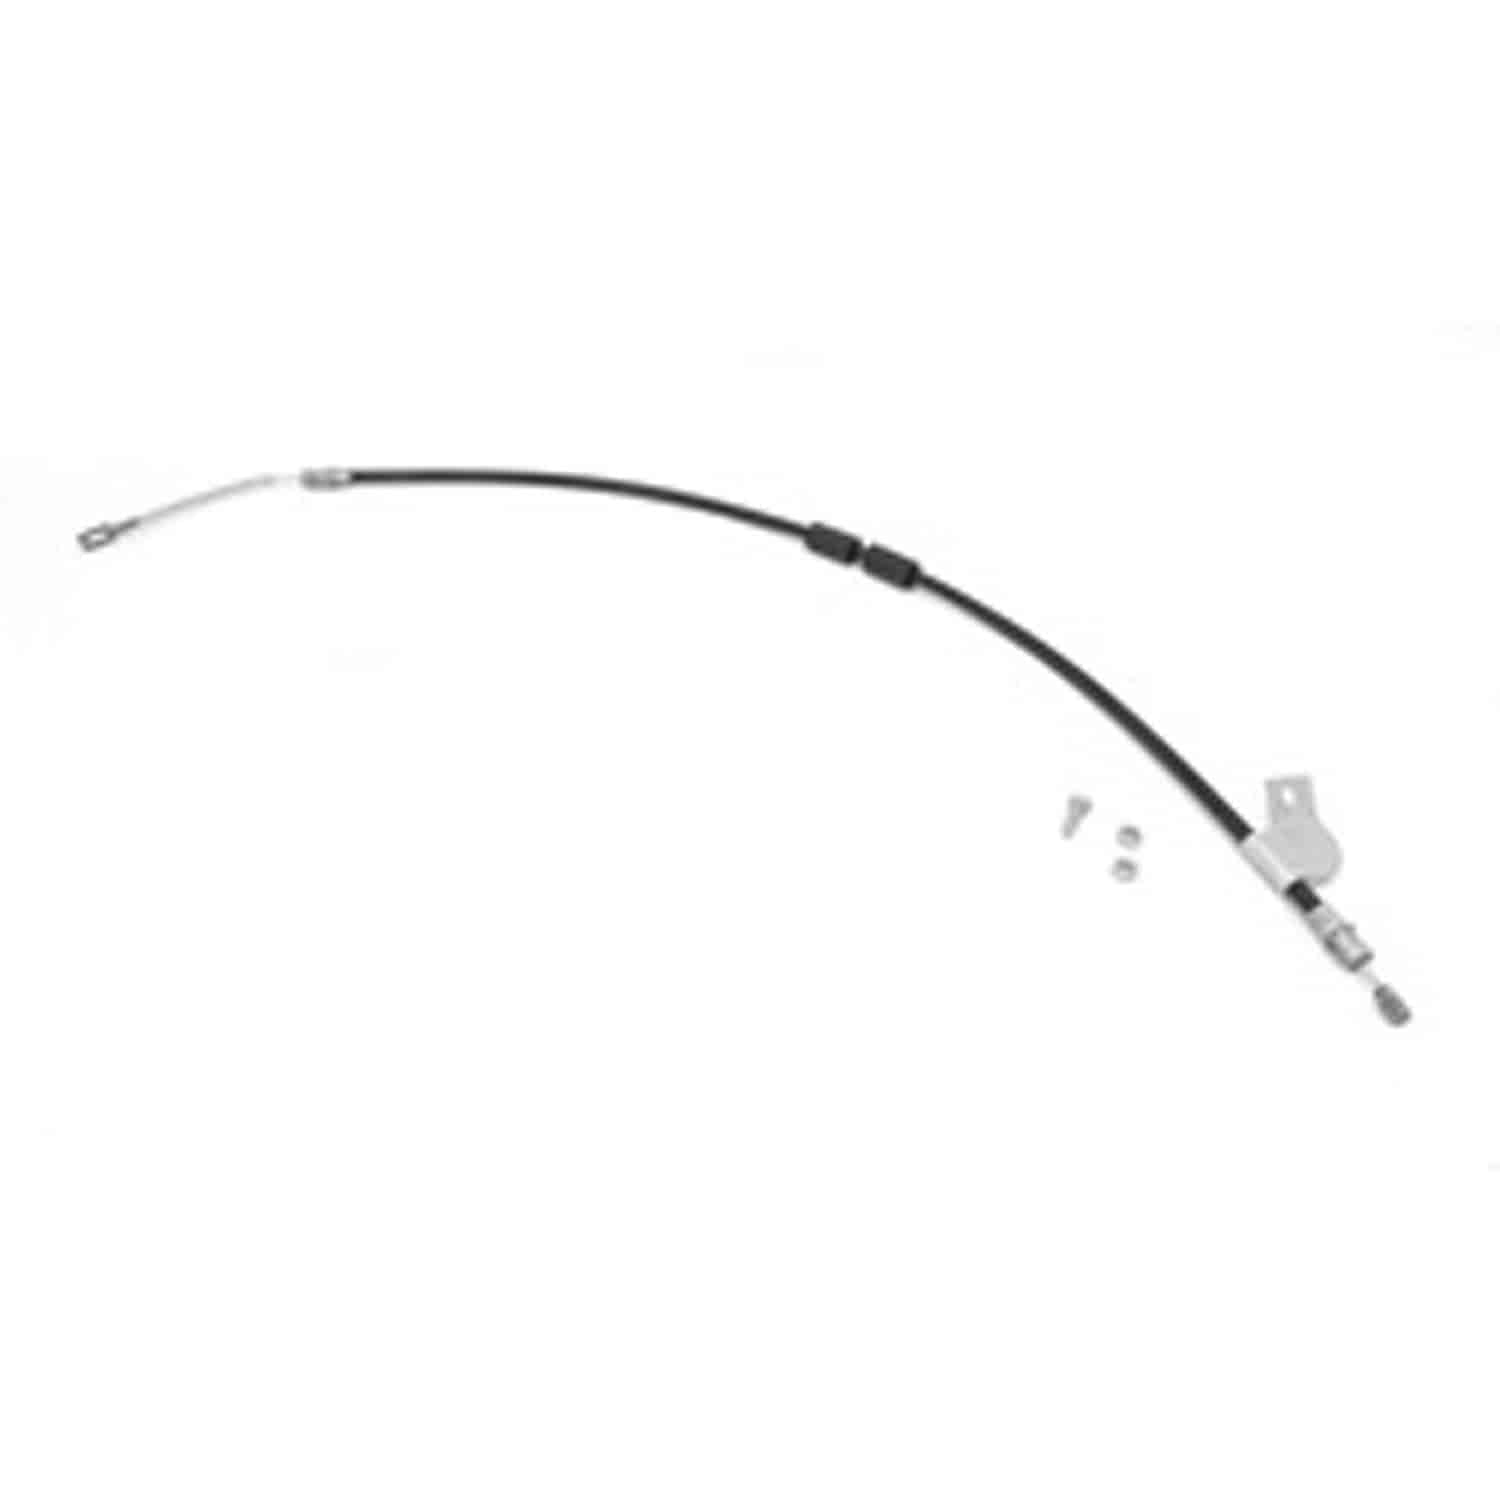 Parking Brake Cable RH Rear With Disc Brake 94-98 Jeep Grand Cherokee ZJ